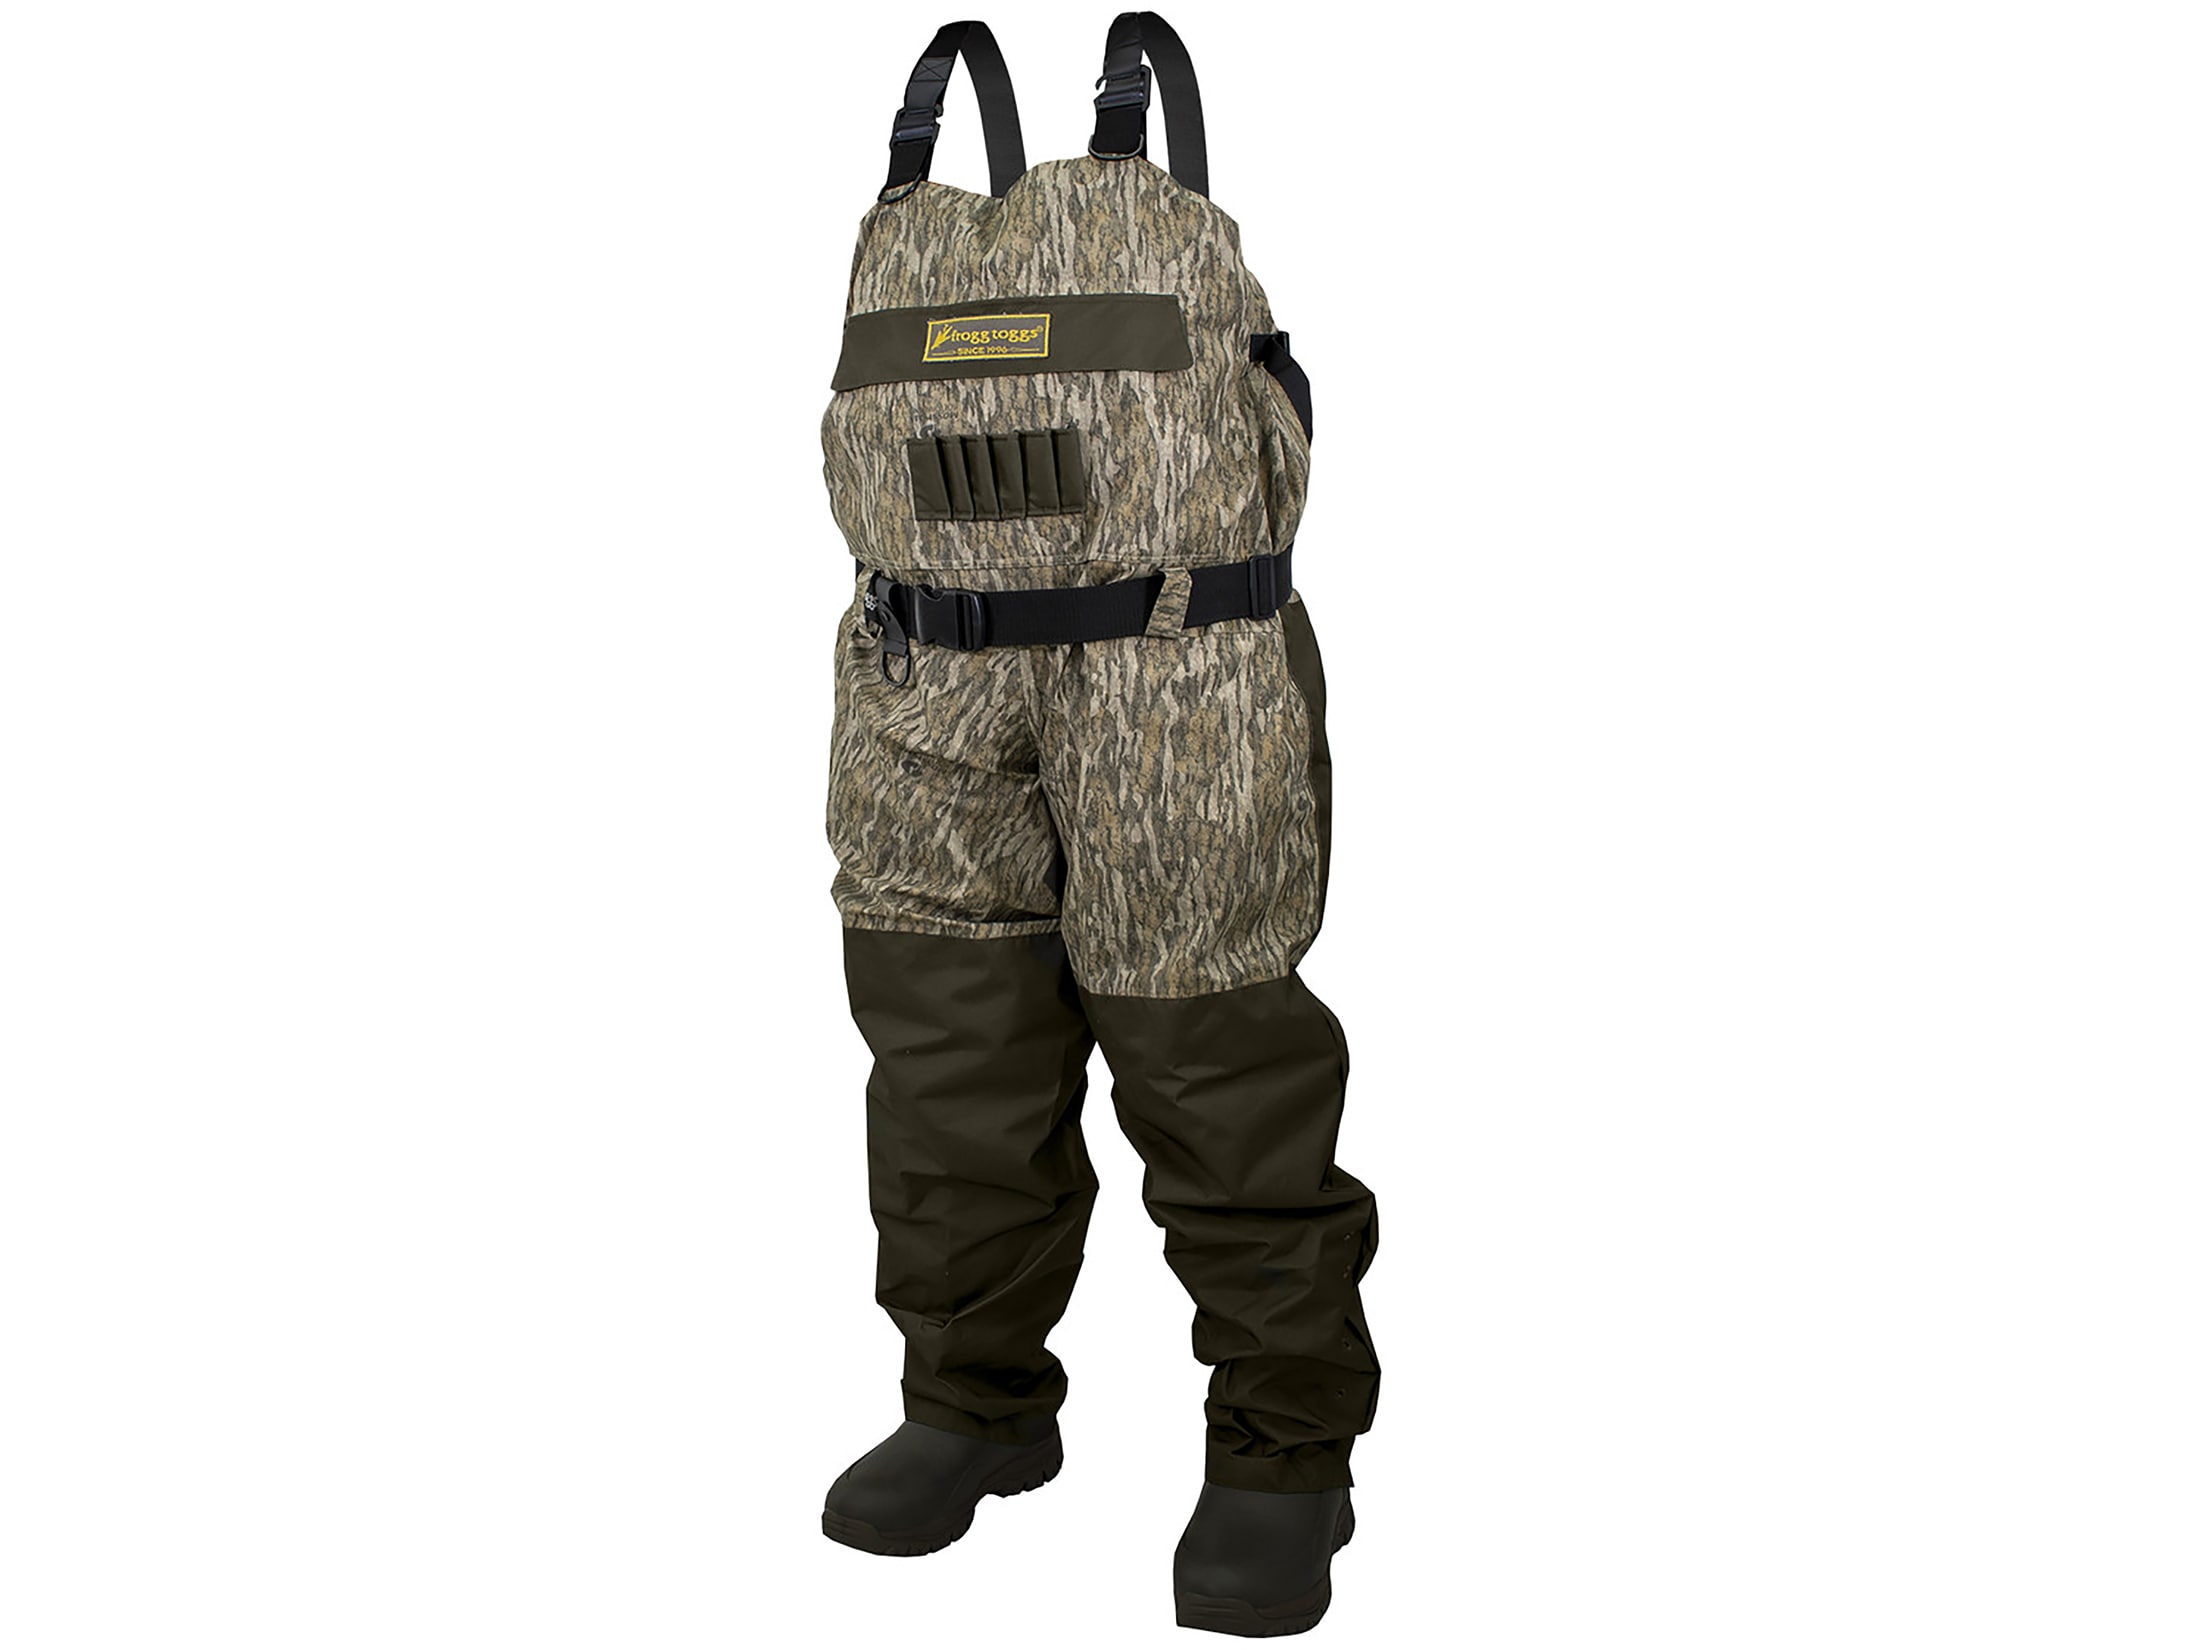 Frogg Toggs Legend Series 2-N-1 Breathable Insulated Chest Waders